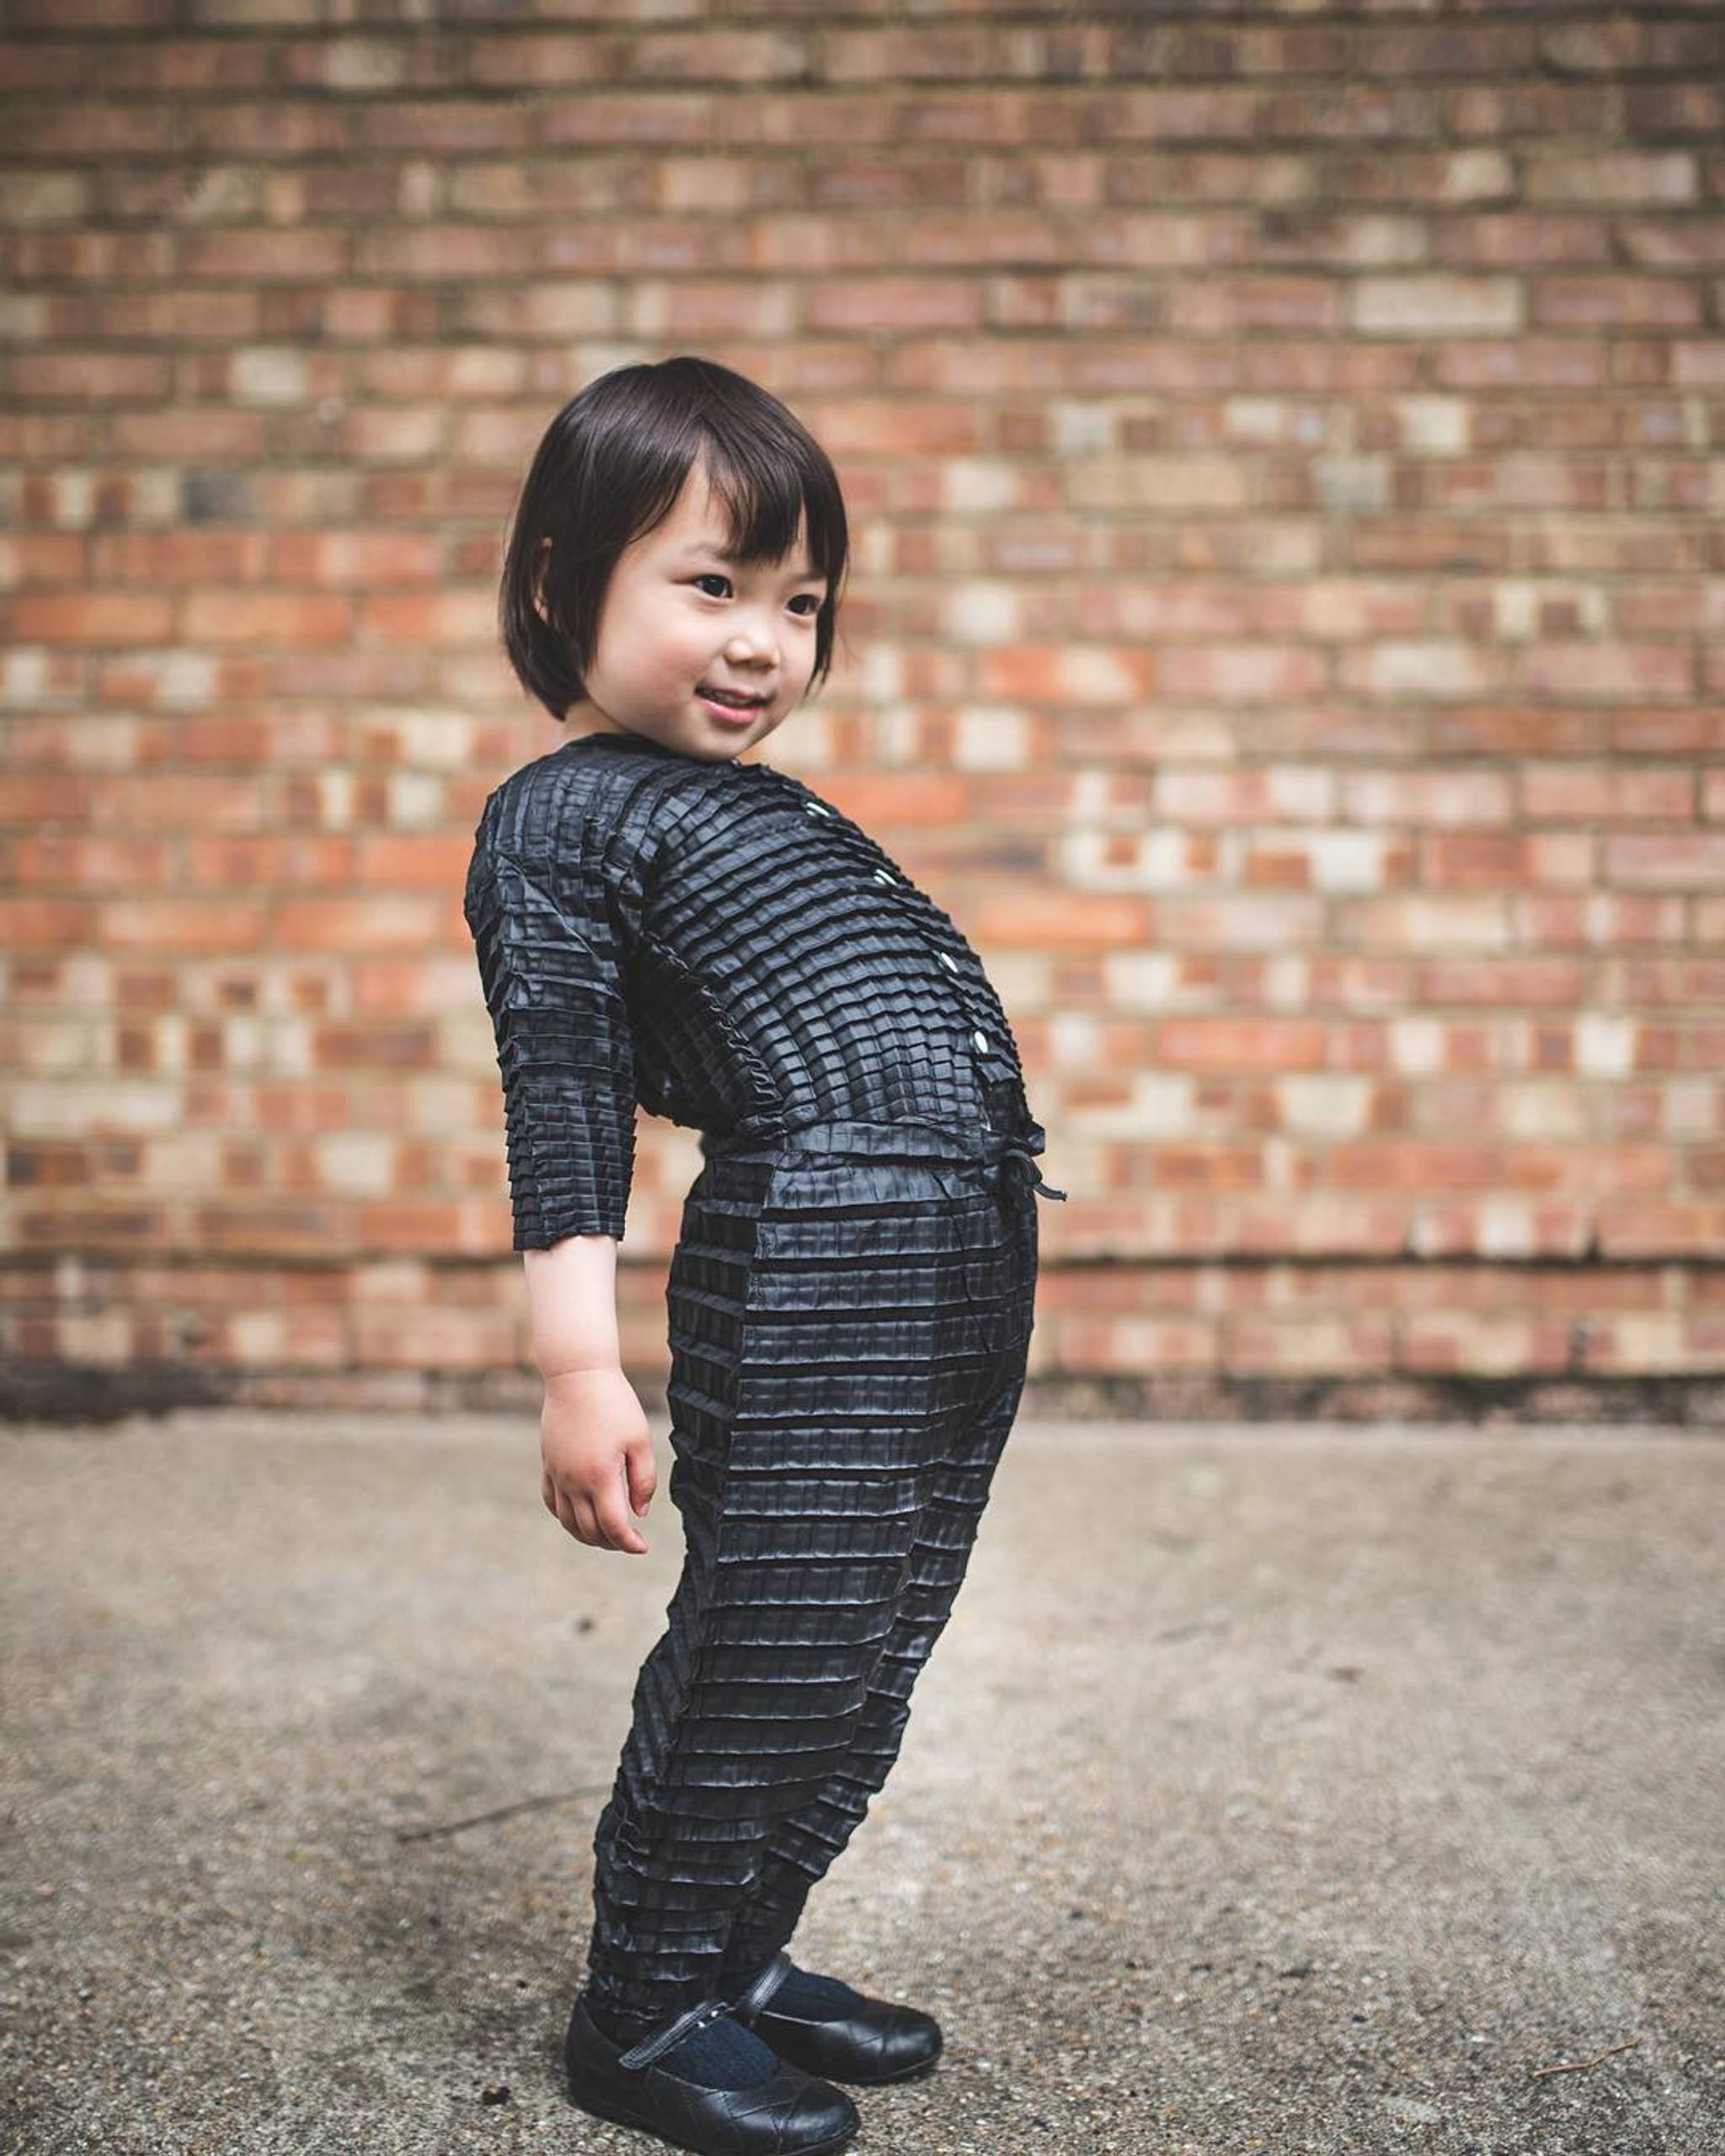 Petit Pli is a clothing line that grows as kids do